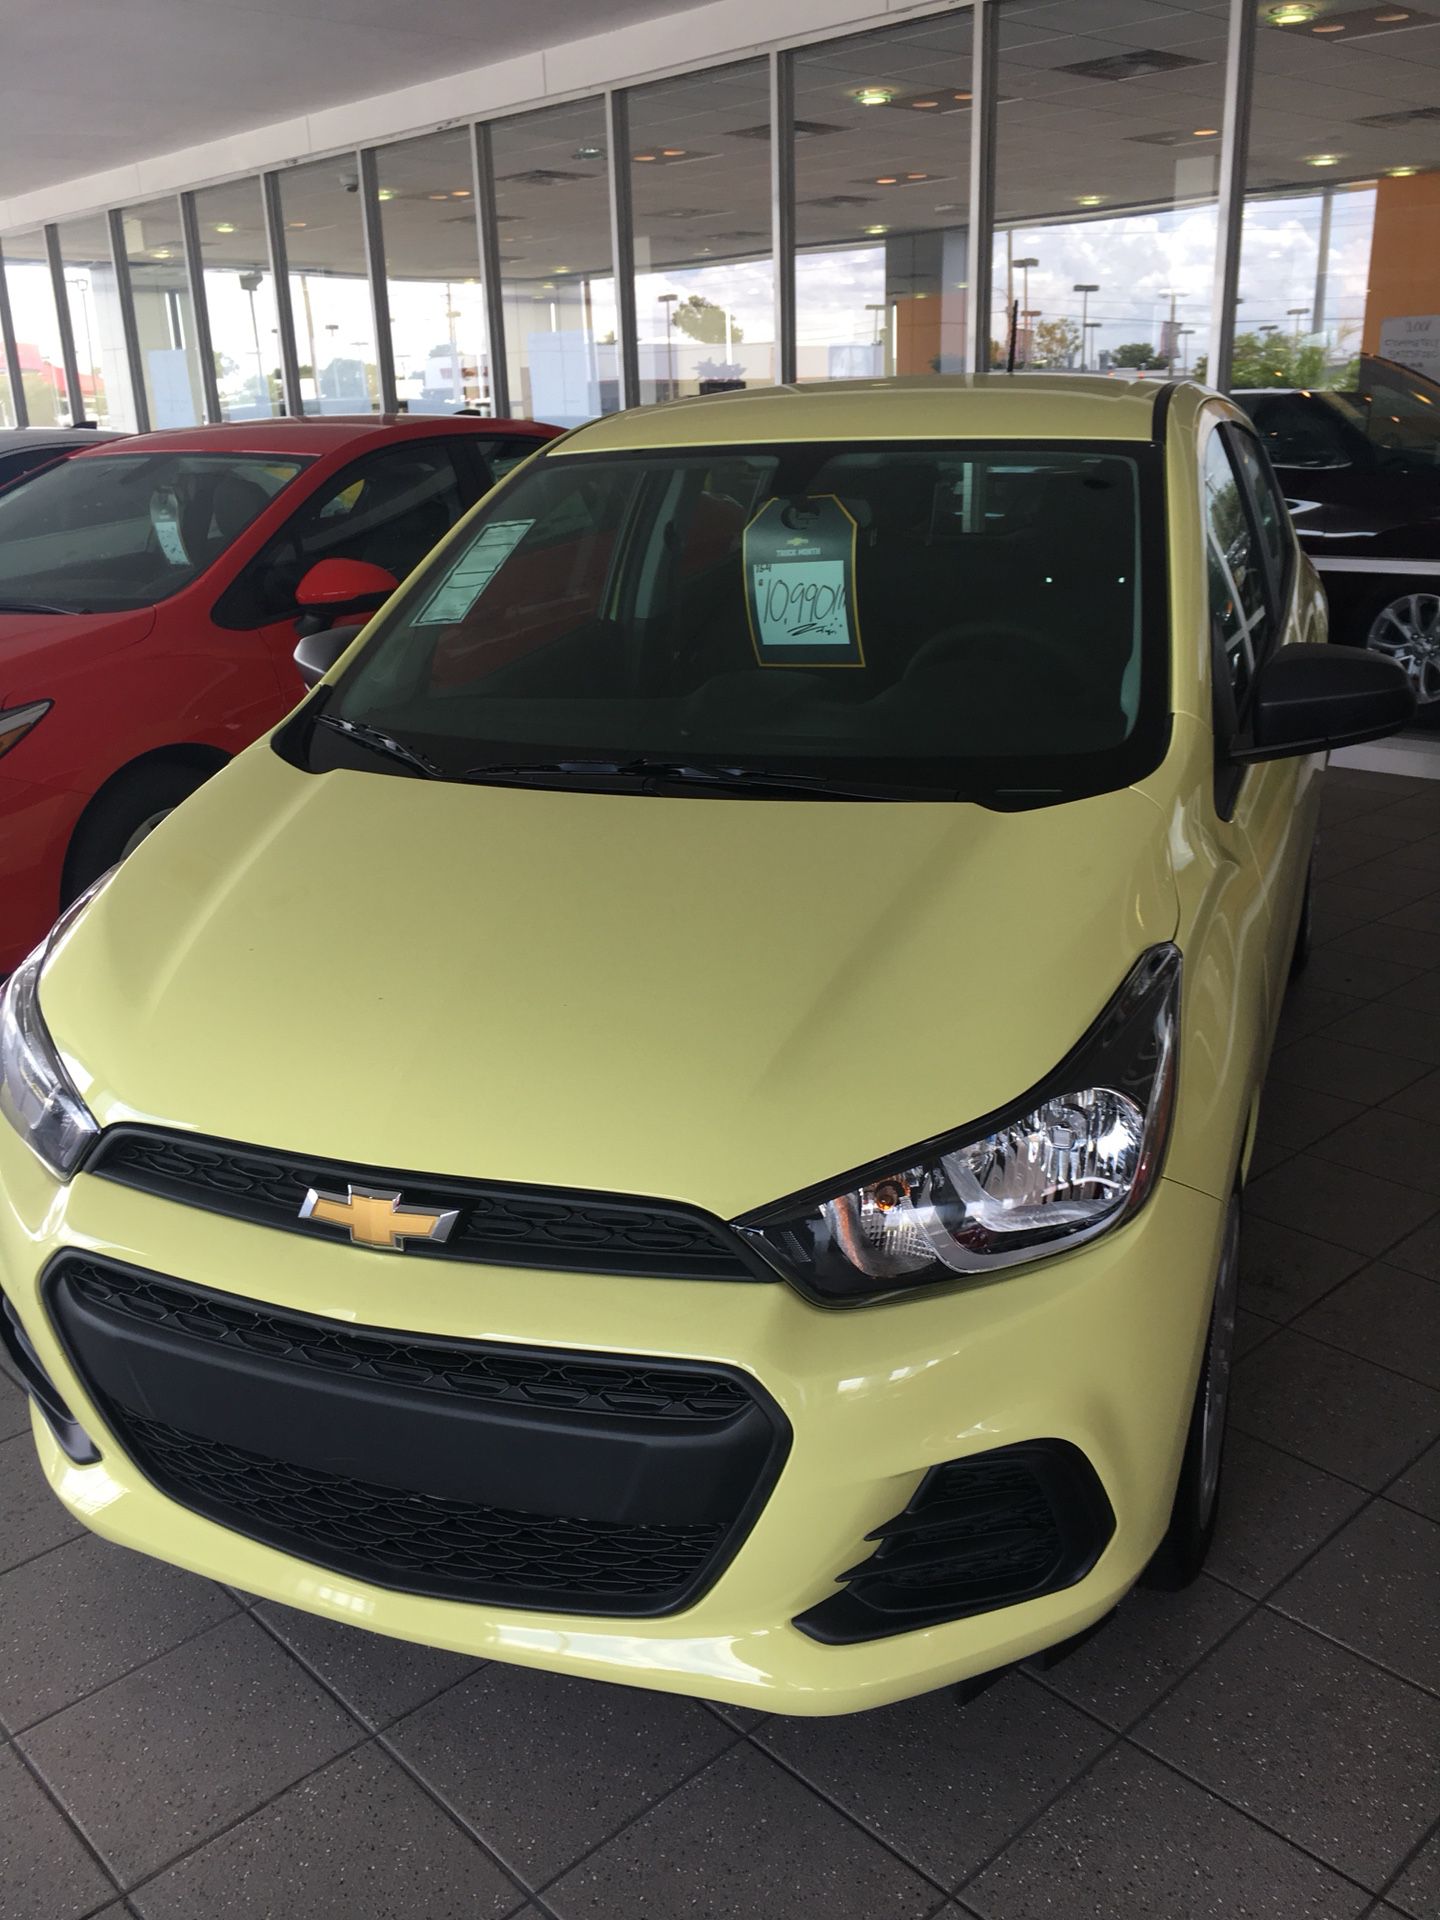 2018 Chevy spark for 10,990 !